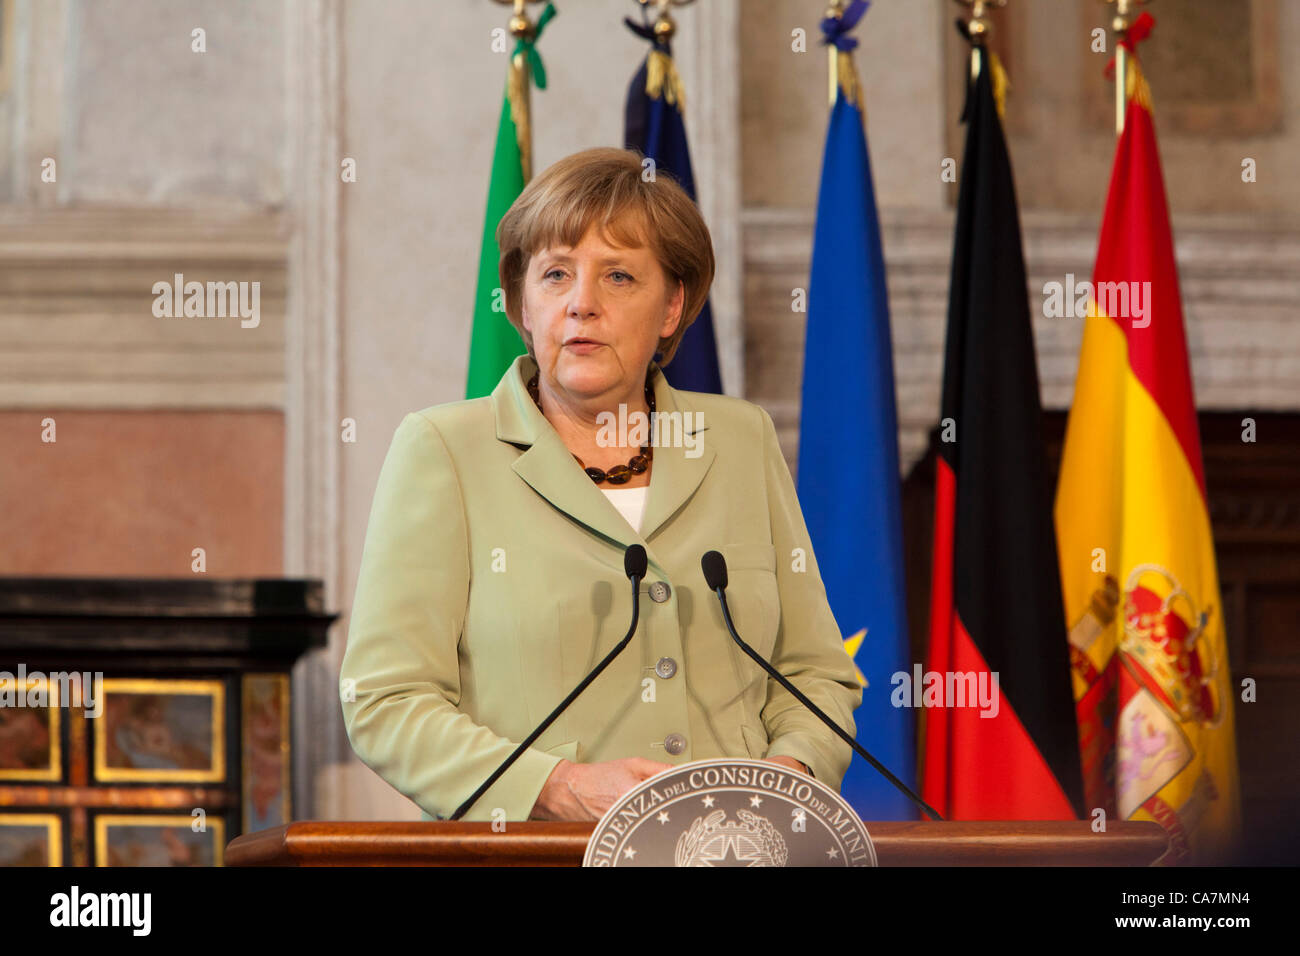 FOUR NATIONS SUMMIT IN ROME, ITALY. German Chancellor Angela Merkel speaking at press conference at the Four nations summit between France, Germany, Italy and Spain at Villa Madama, Rome, Italy. 22/06/2012 Stock Photo